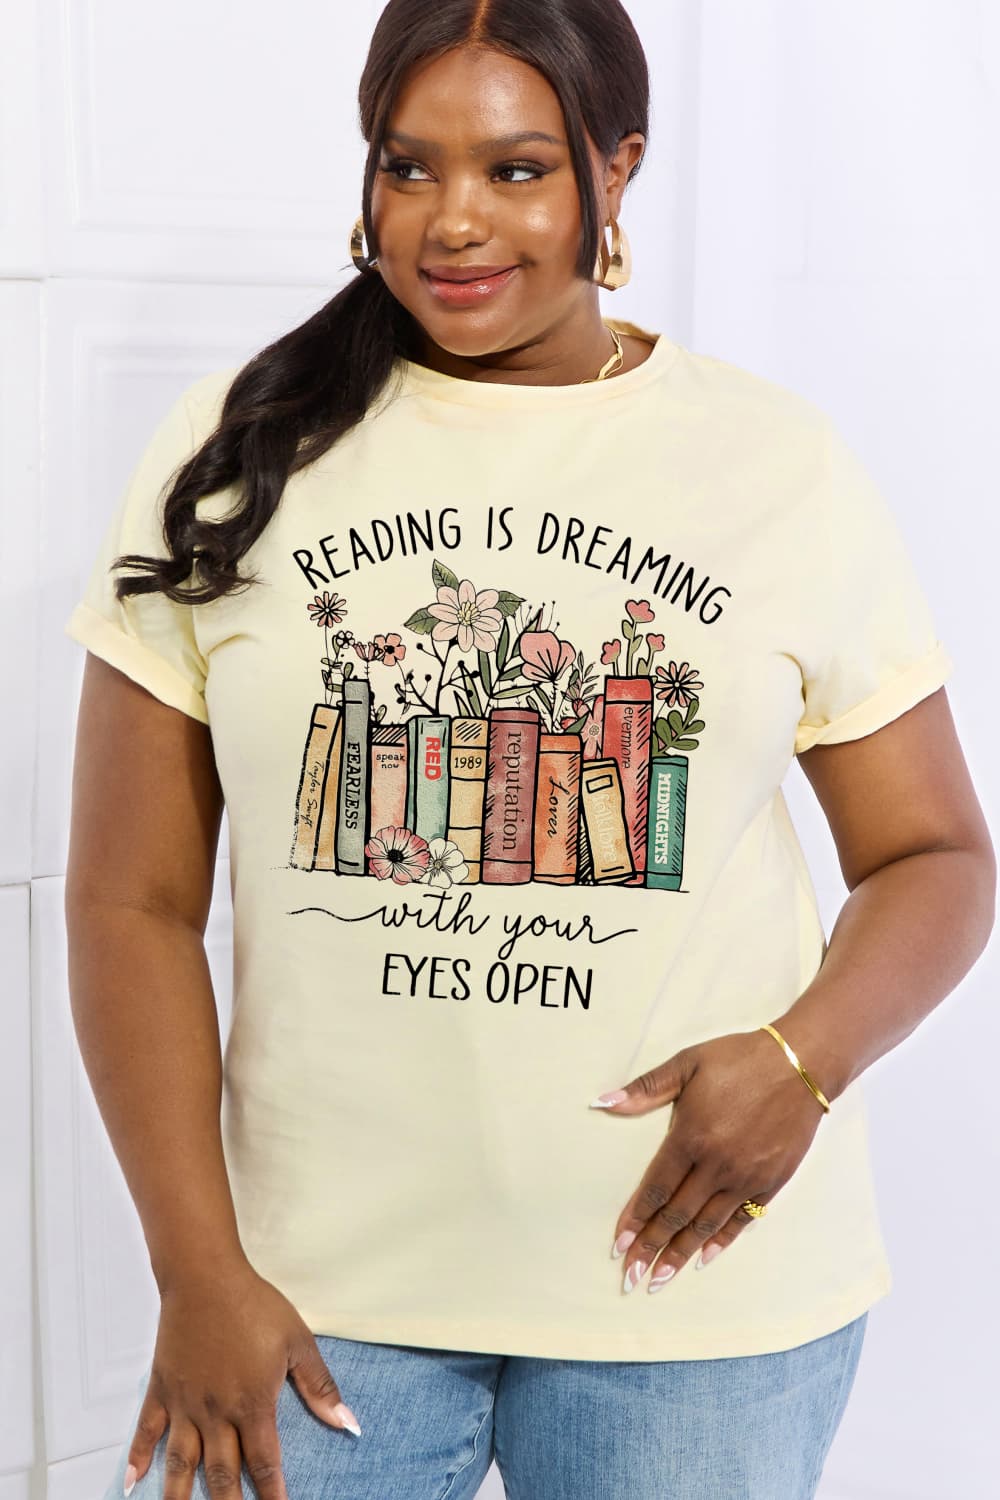 Simply Love Full Size READING IS DREAMING WITH YOUR EYES OPEN Graphic Cotton Tee free shipping -Oh Em Gee Boutique